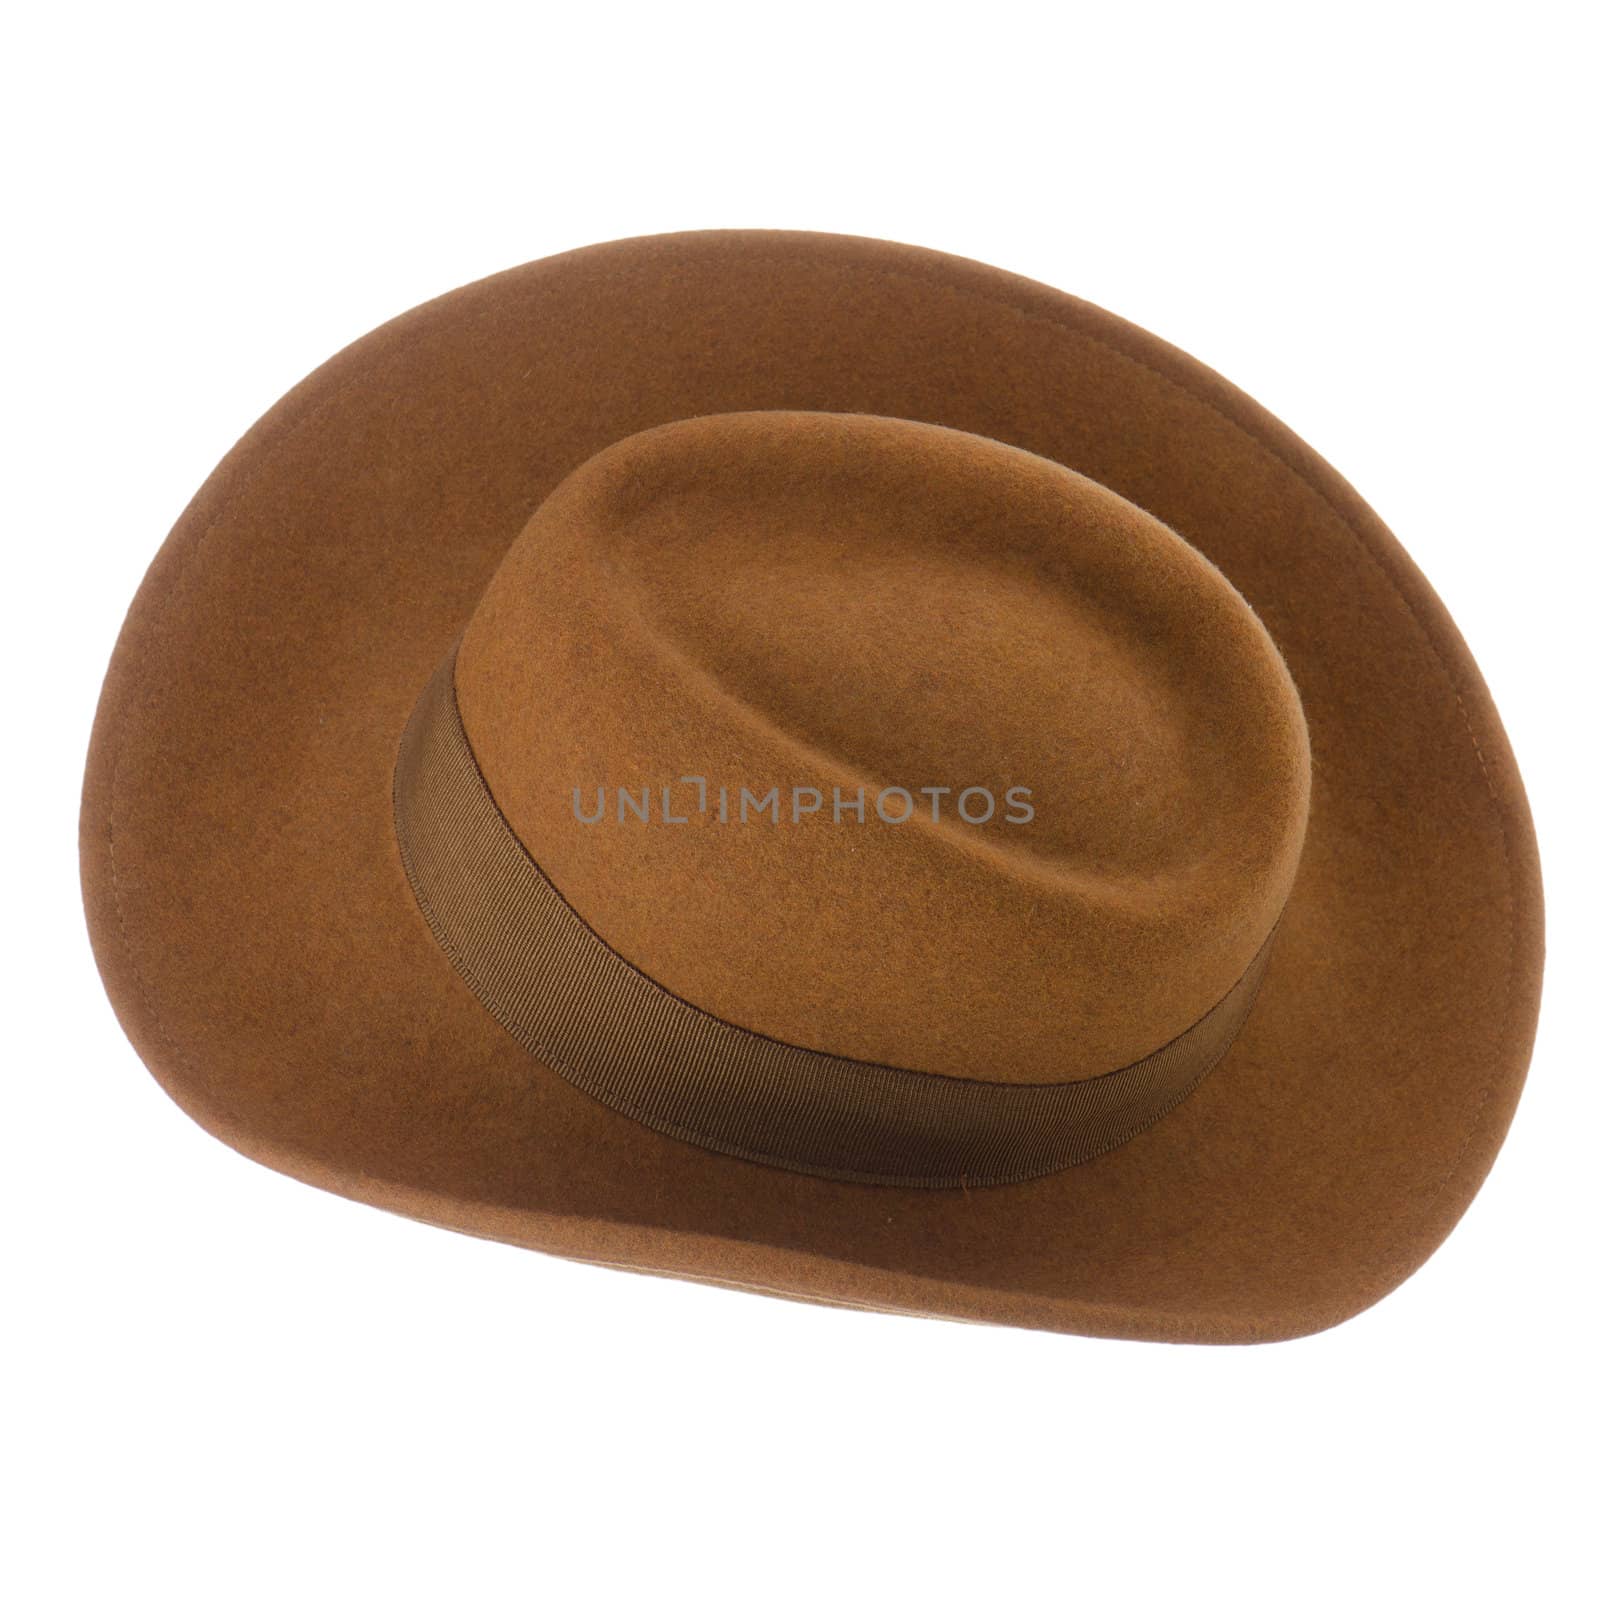 Brown vintage hat isolated on white background.